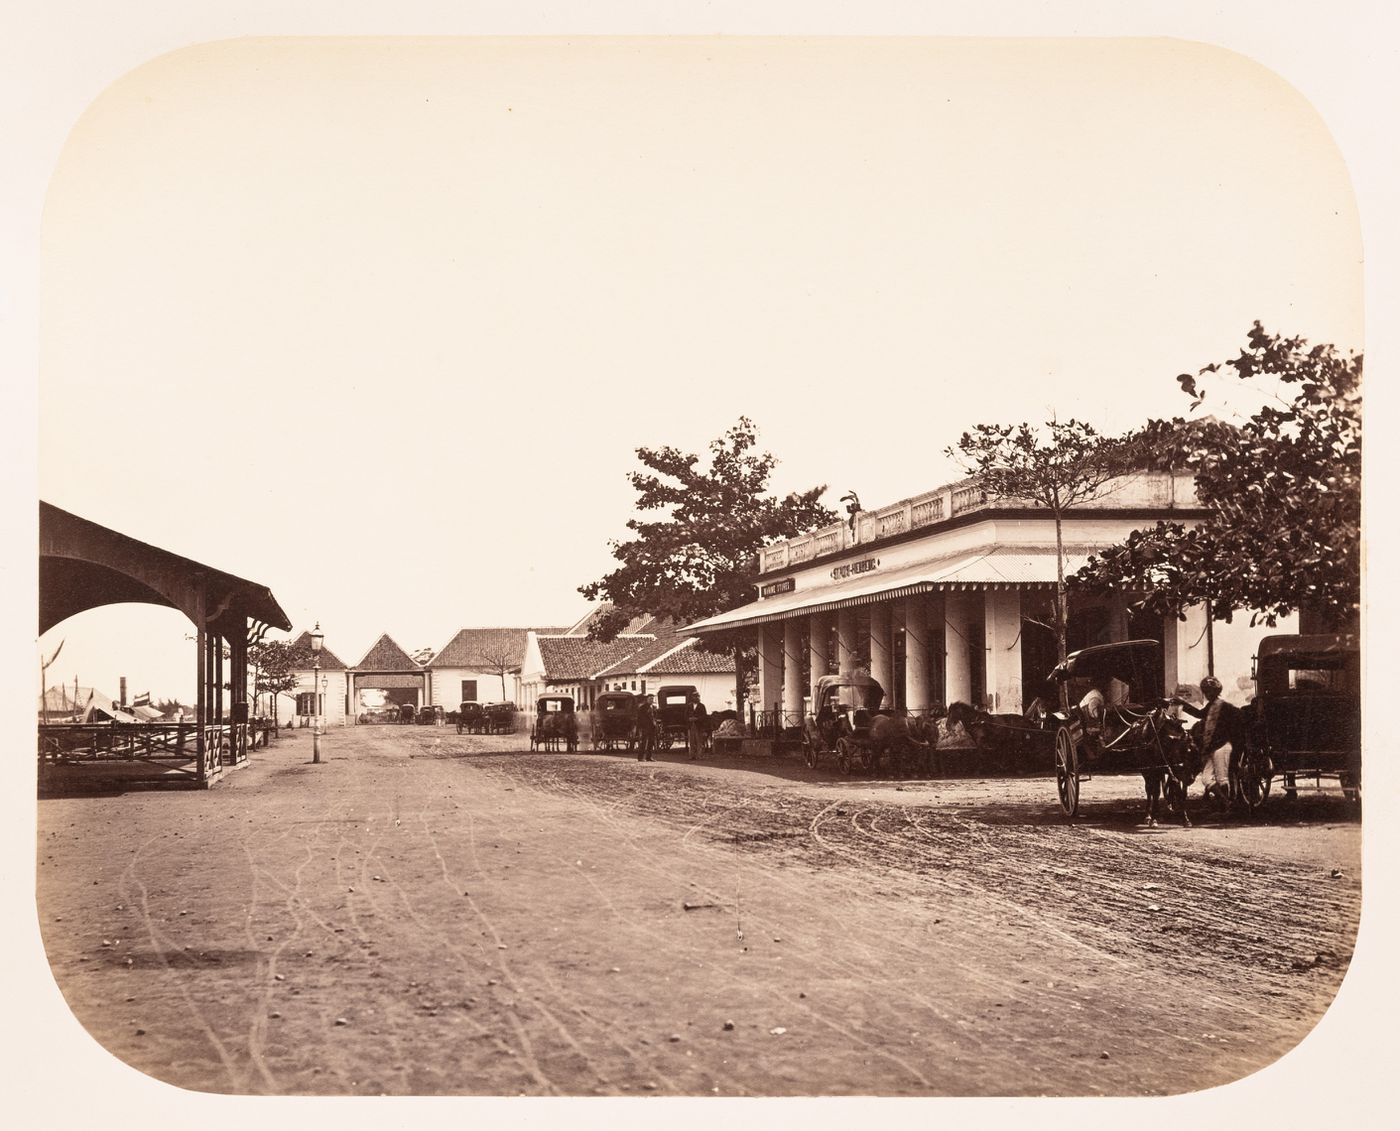 View of the Stads Herberg [City Inn], the Kleine Boom [Small Custom Post], a street and carriages, Batavia (now Jakarta), Dutch East Indies (now Indonesia)